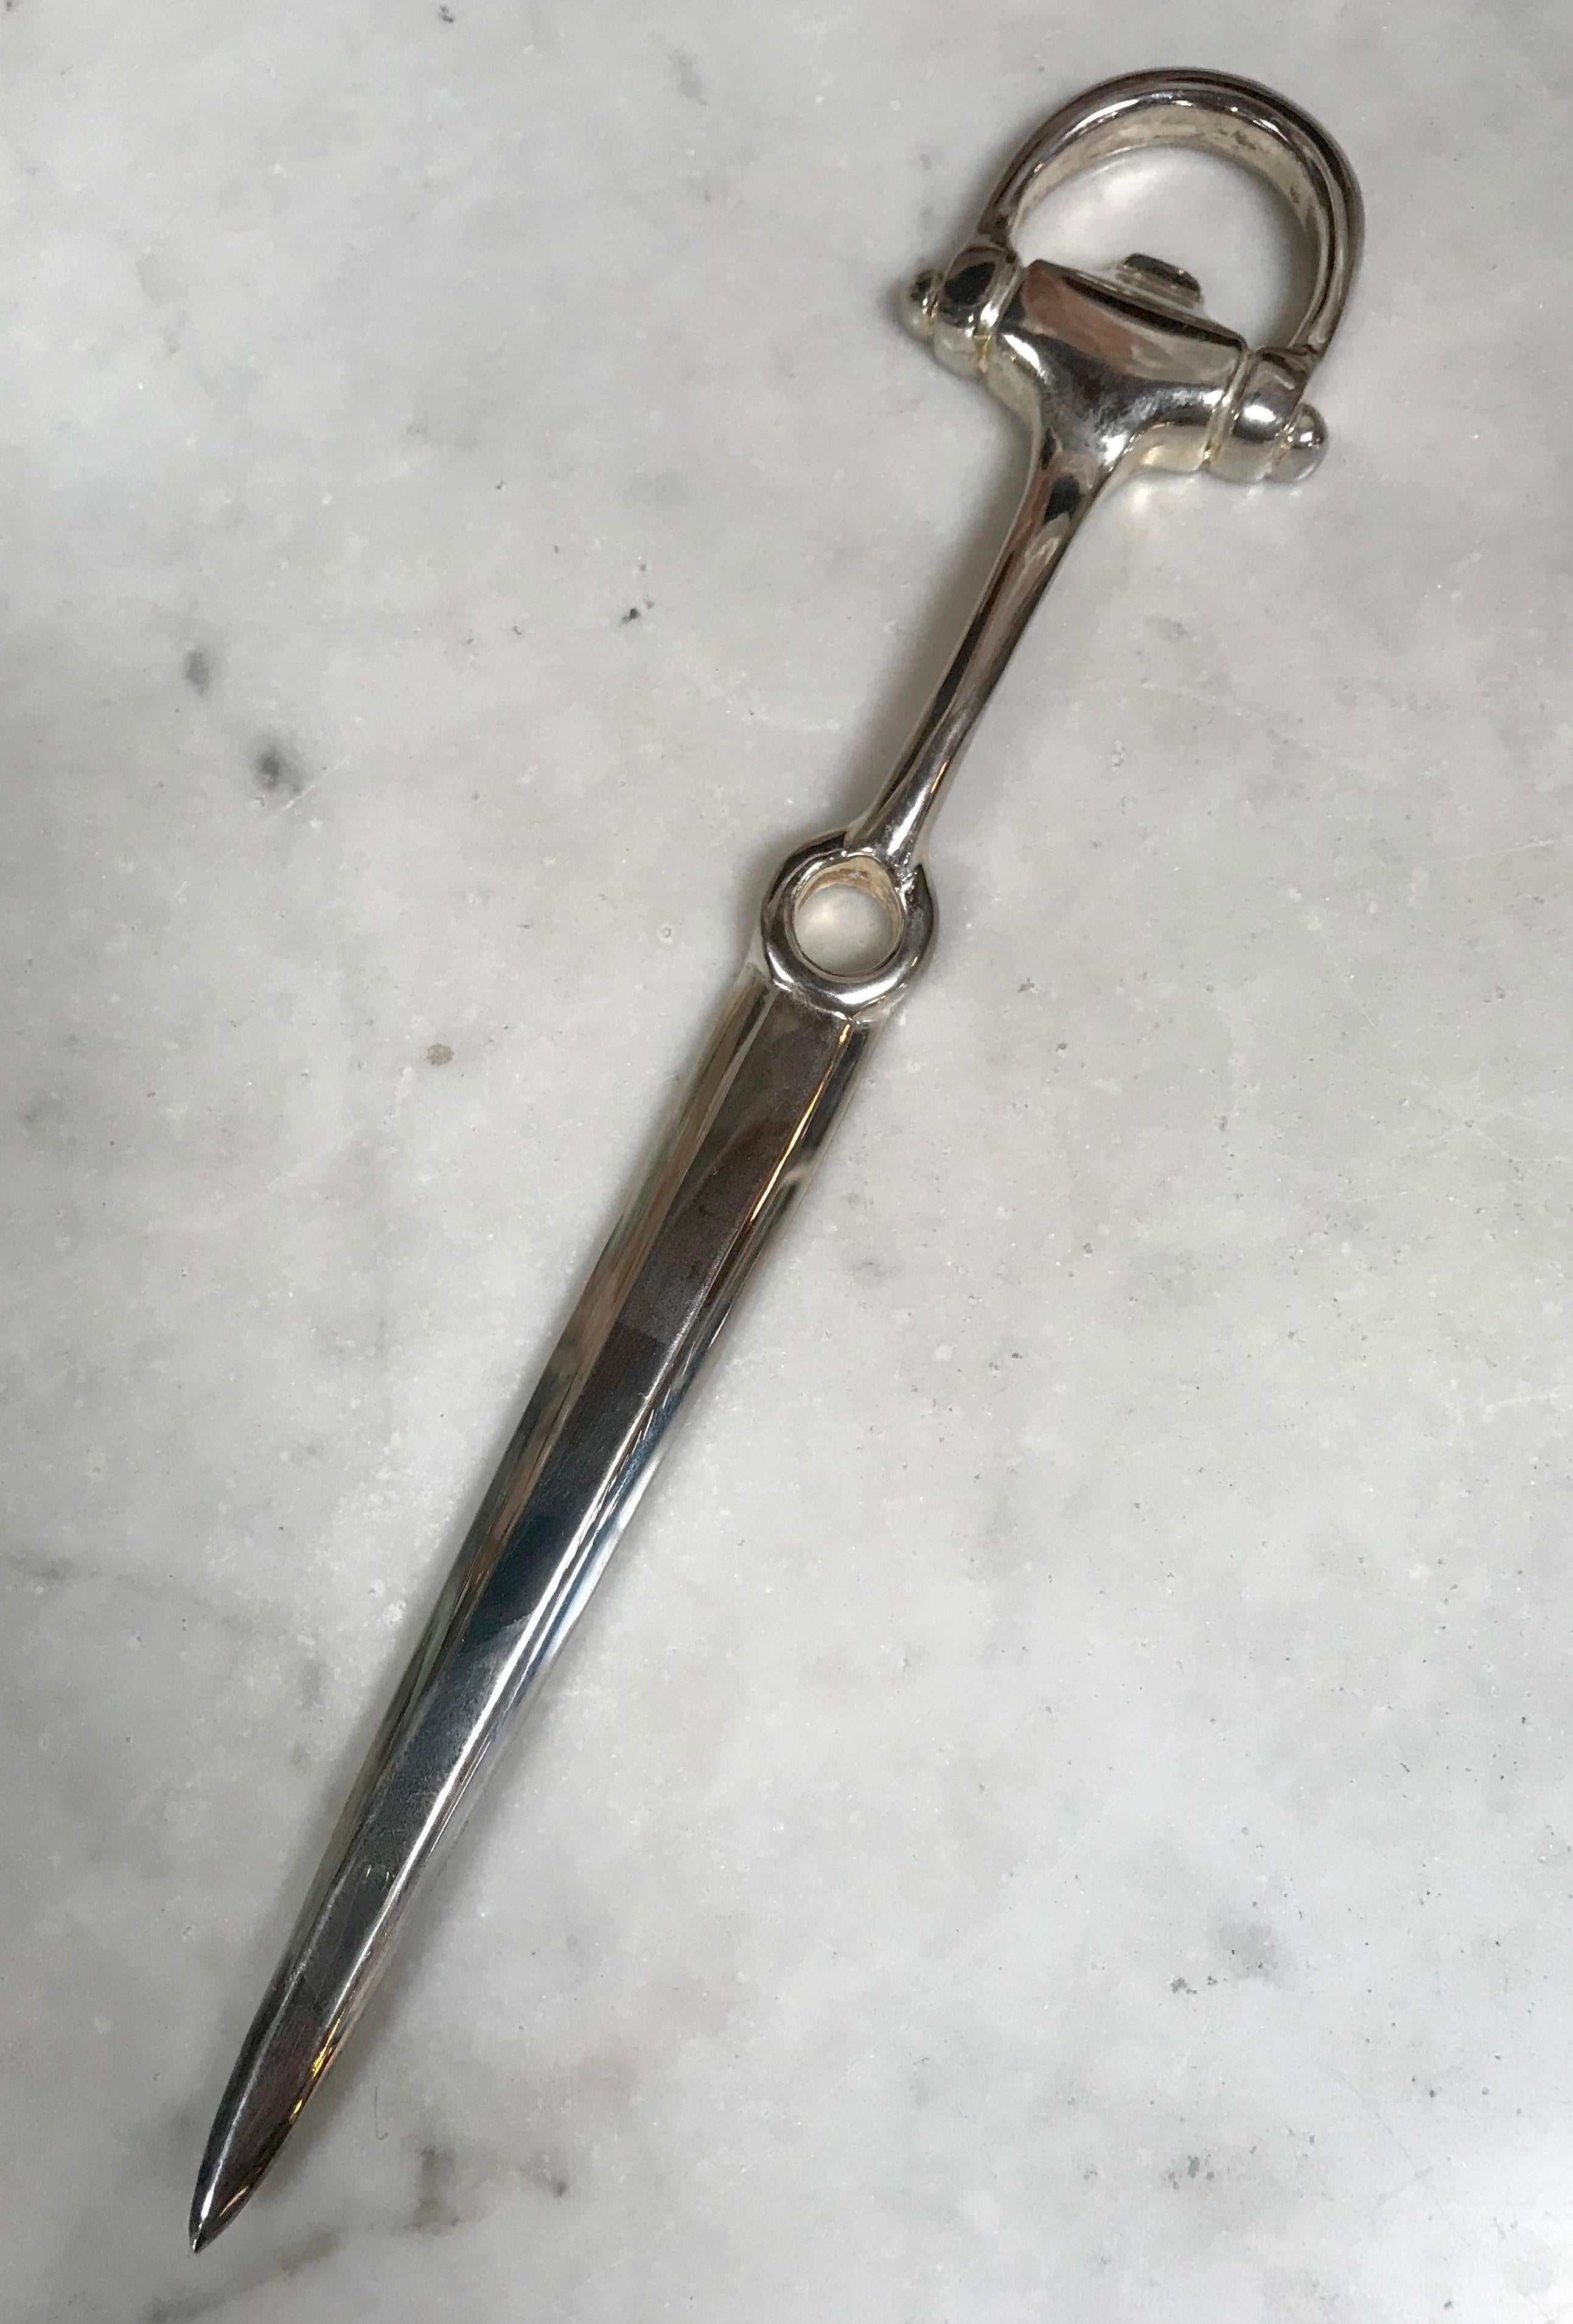 Silver plated equestrian letter opener, Italy, 1980s.
This is a must-have on any gentleman collector's wish list.